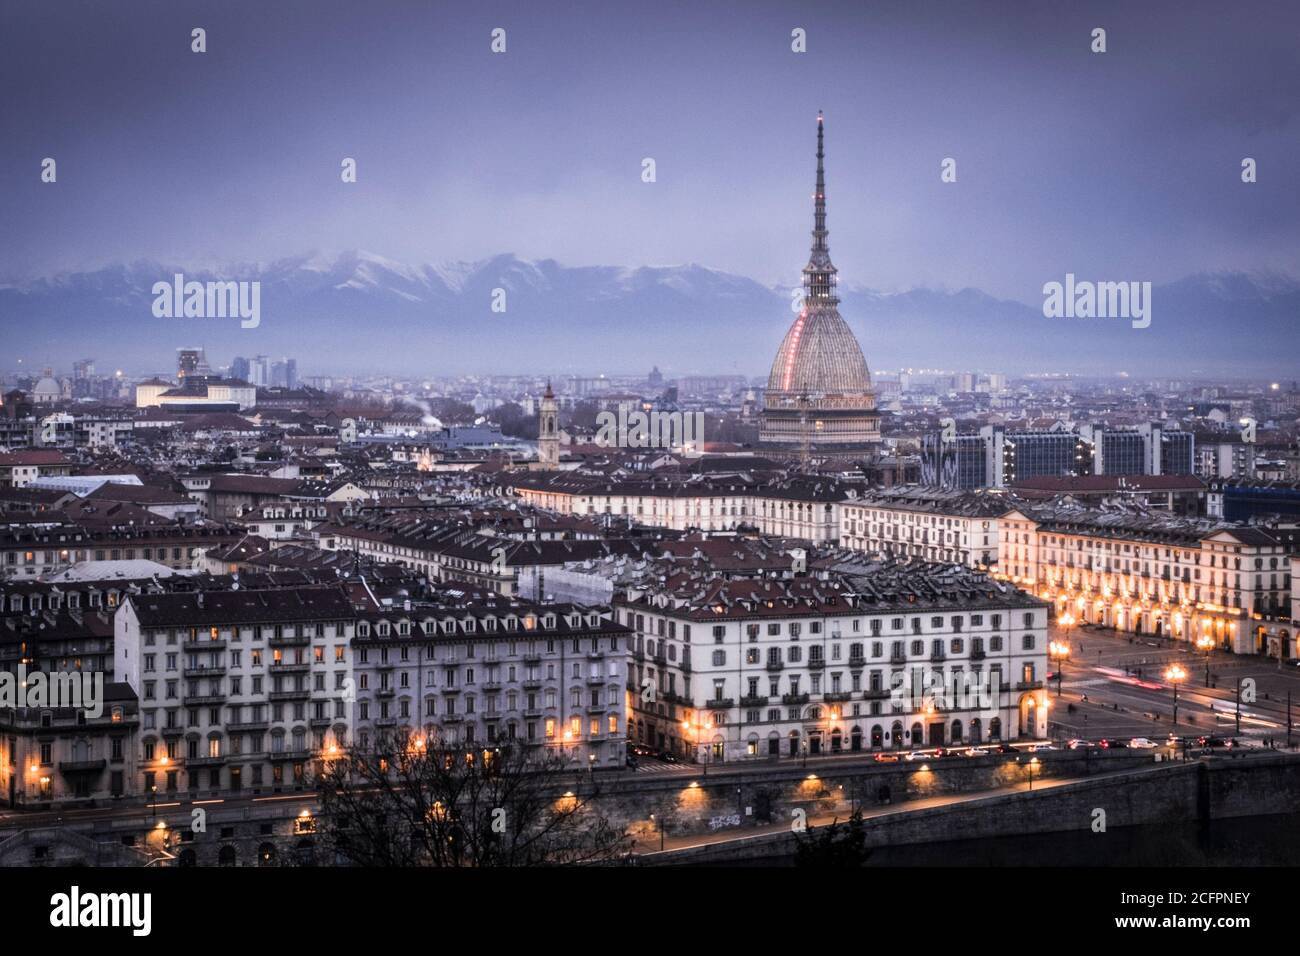 Color and monumento of the city of Turin, Italy. Turin is the capital of Piemonte region and one of the most beautiful city in Italy Stock Photo